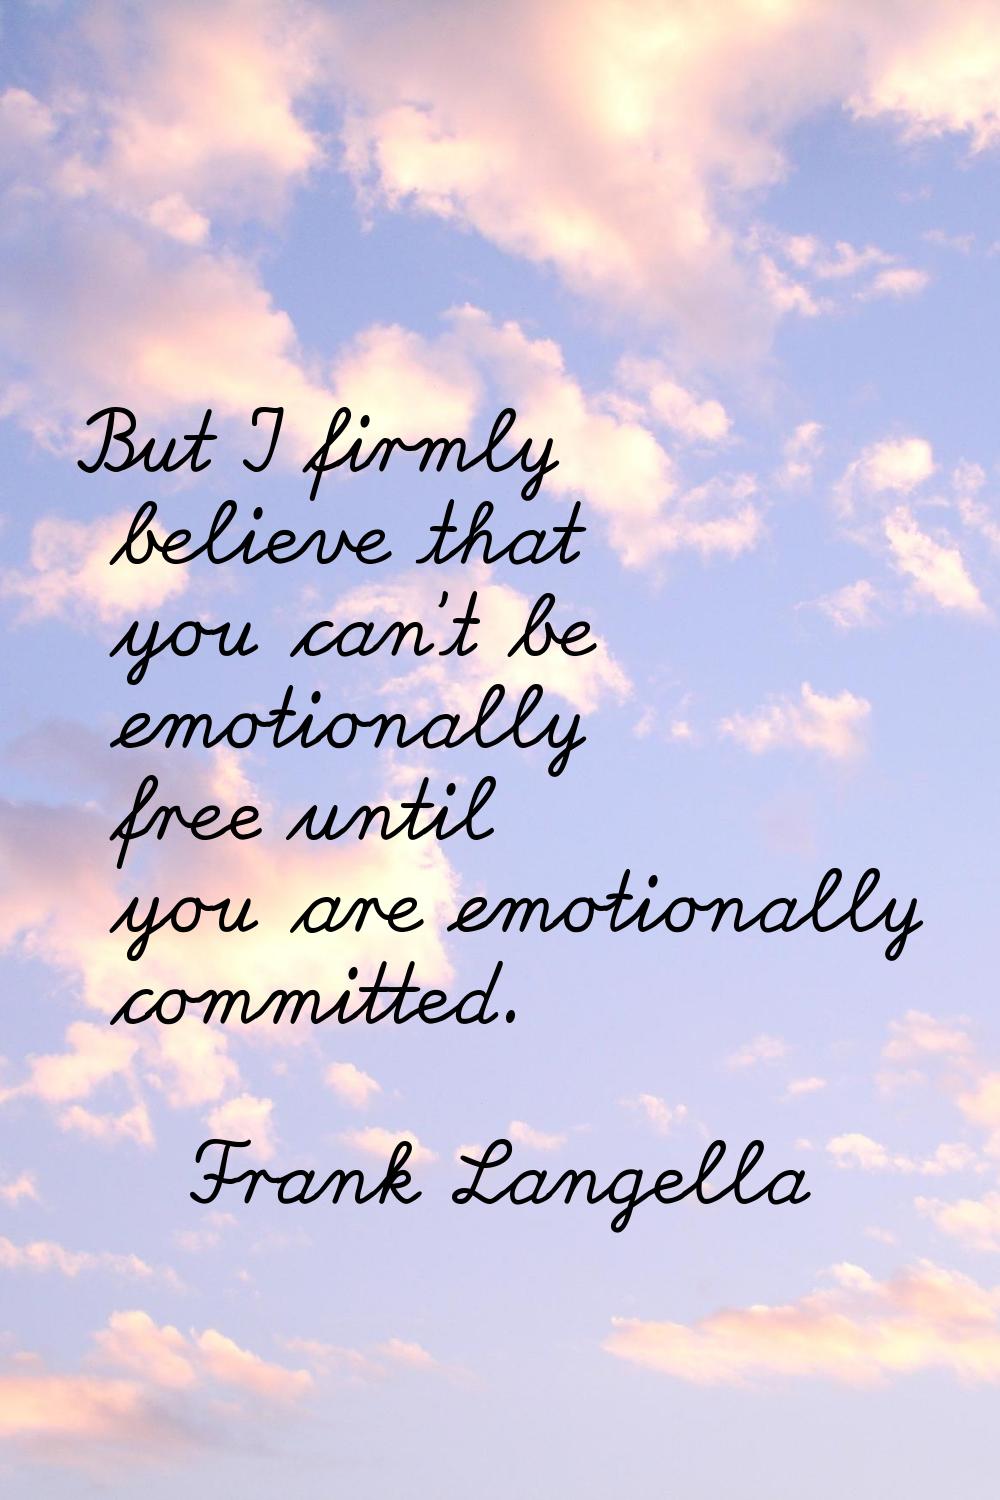 But I firmly believe that you can't be emotionally free until you are emotionally committed.